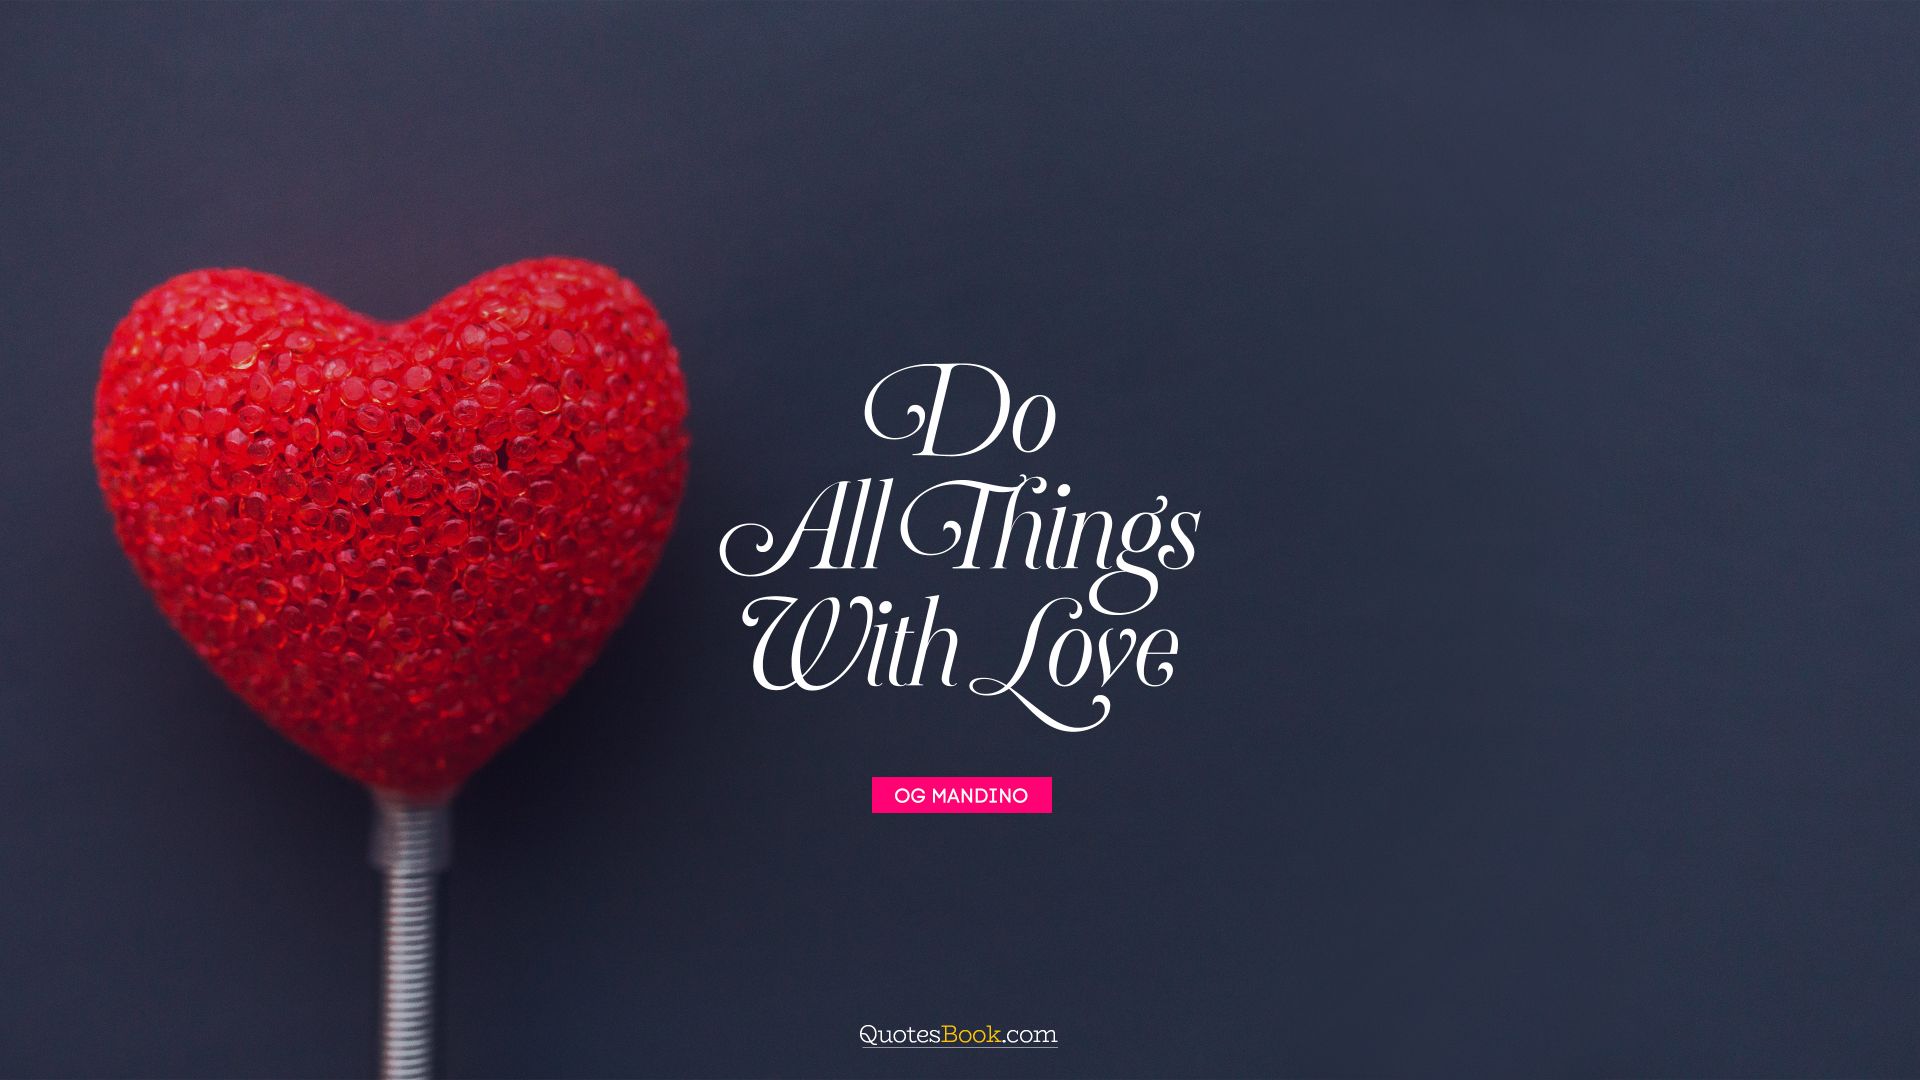 Do all things with love. - Quote by Og Mandino